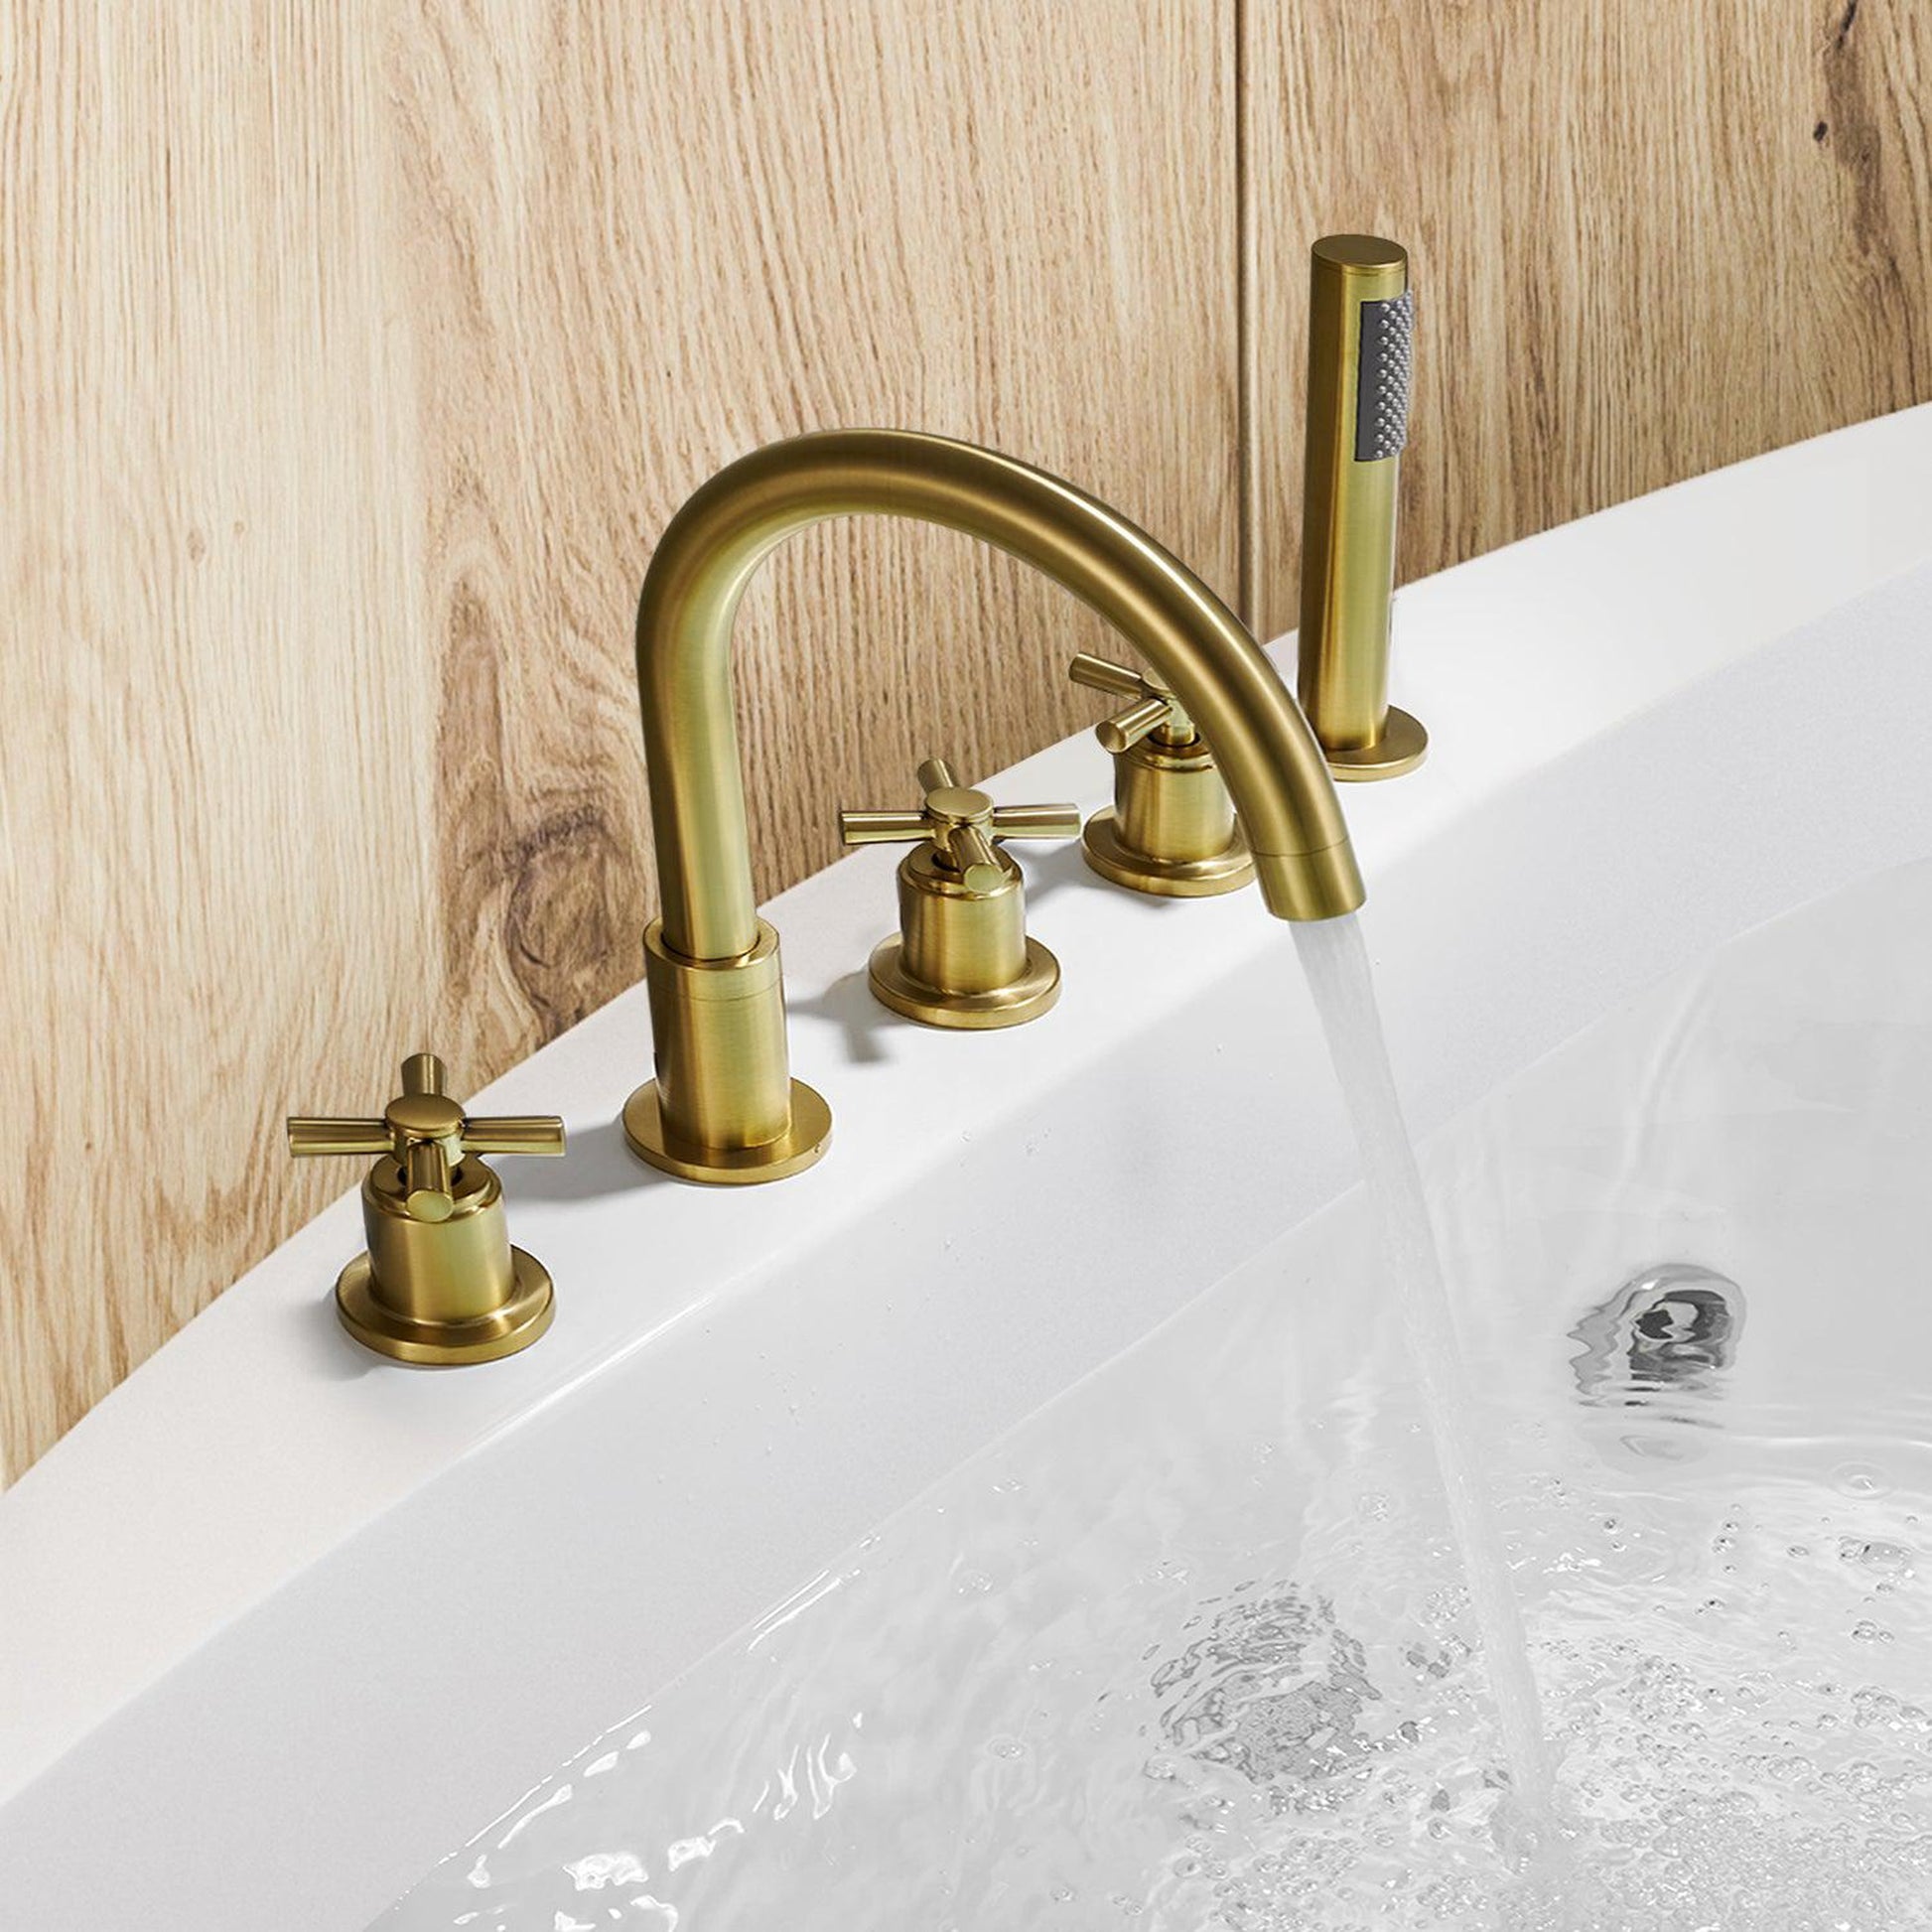 Altair Sorlia Brushed Gold Cross Handles Deck-mounted Bathtub Faucet With Handshower